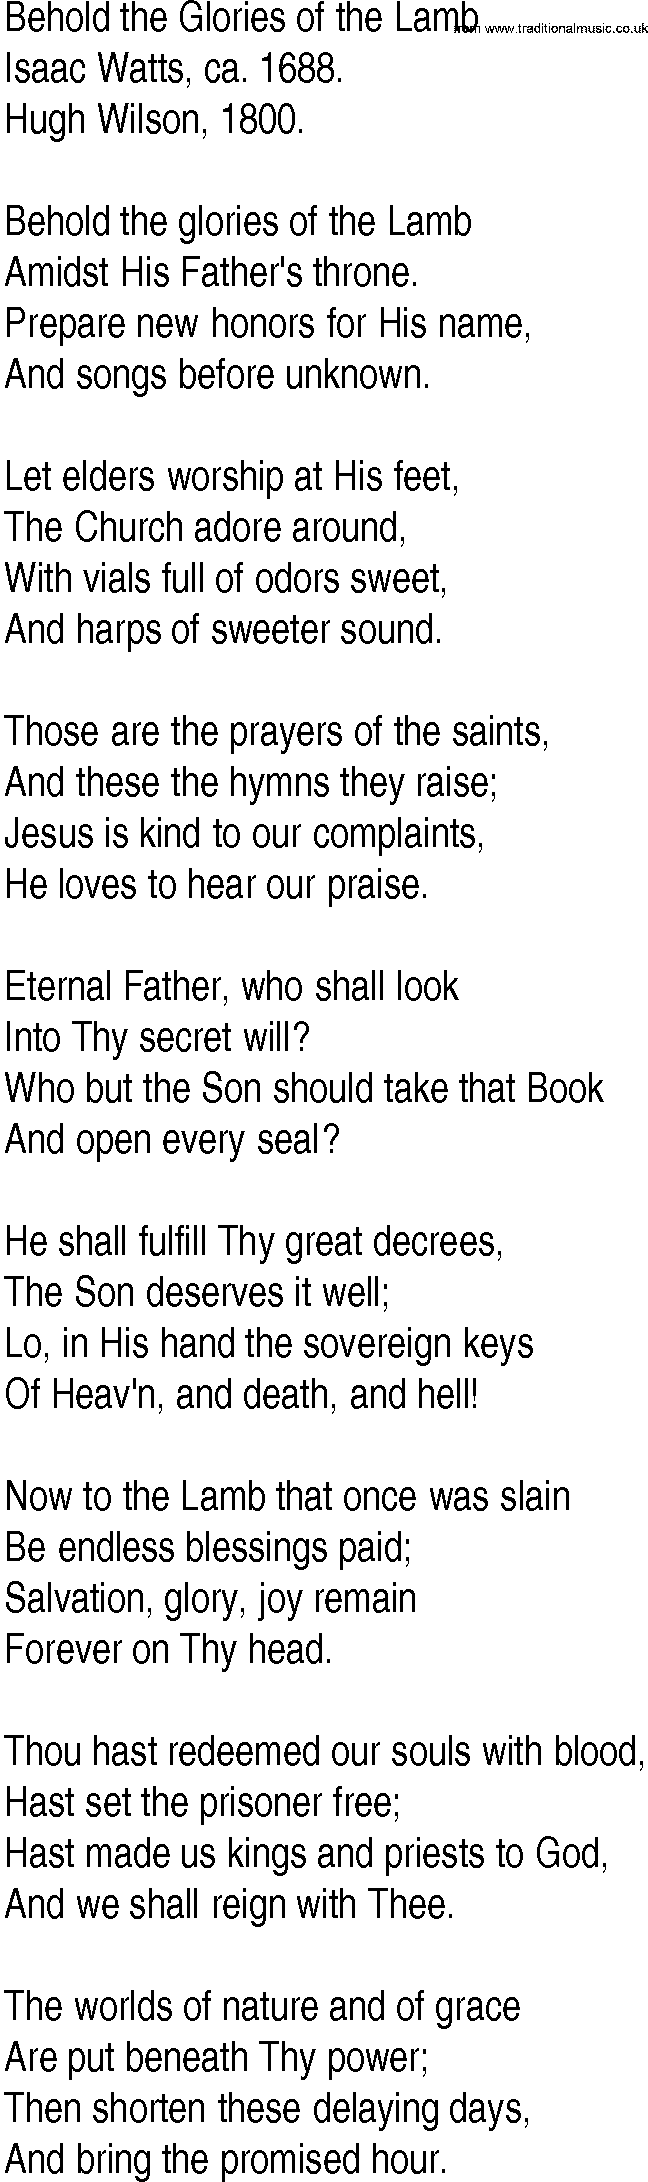 Hymn and Gospel Song: Behold the Glories of the Lamb by Isaac Watts ca lyrics